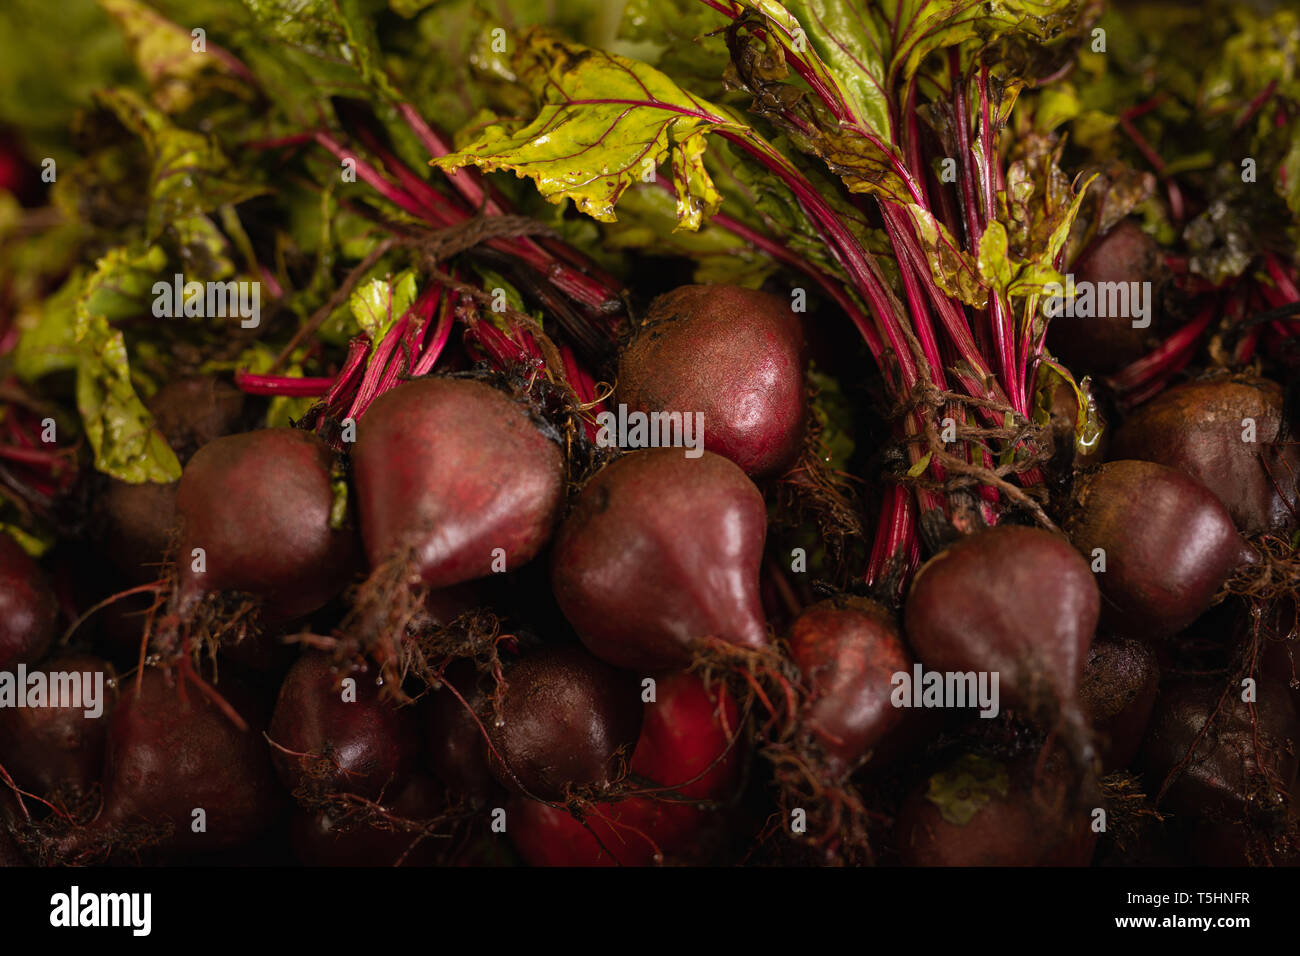 Bunch of beetroot Stock Photo